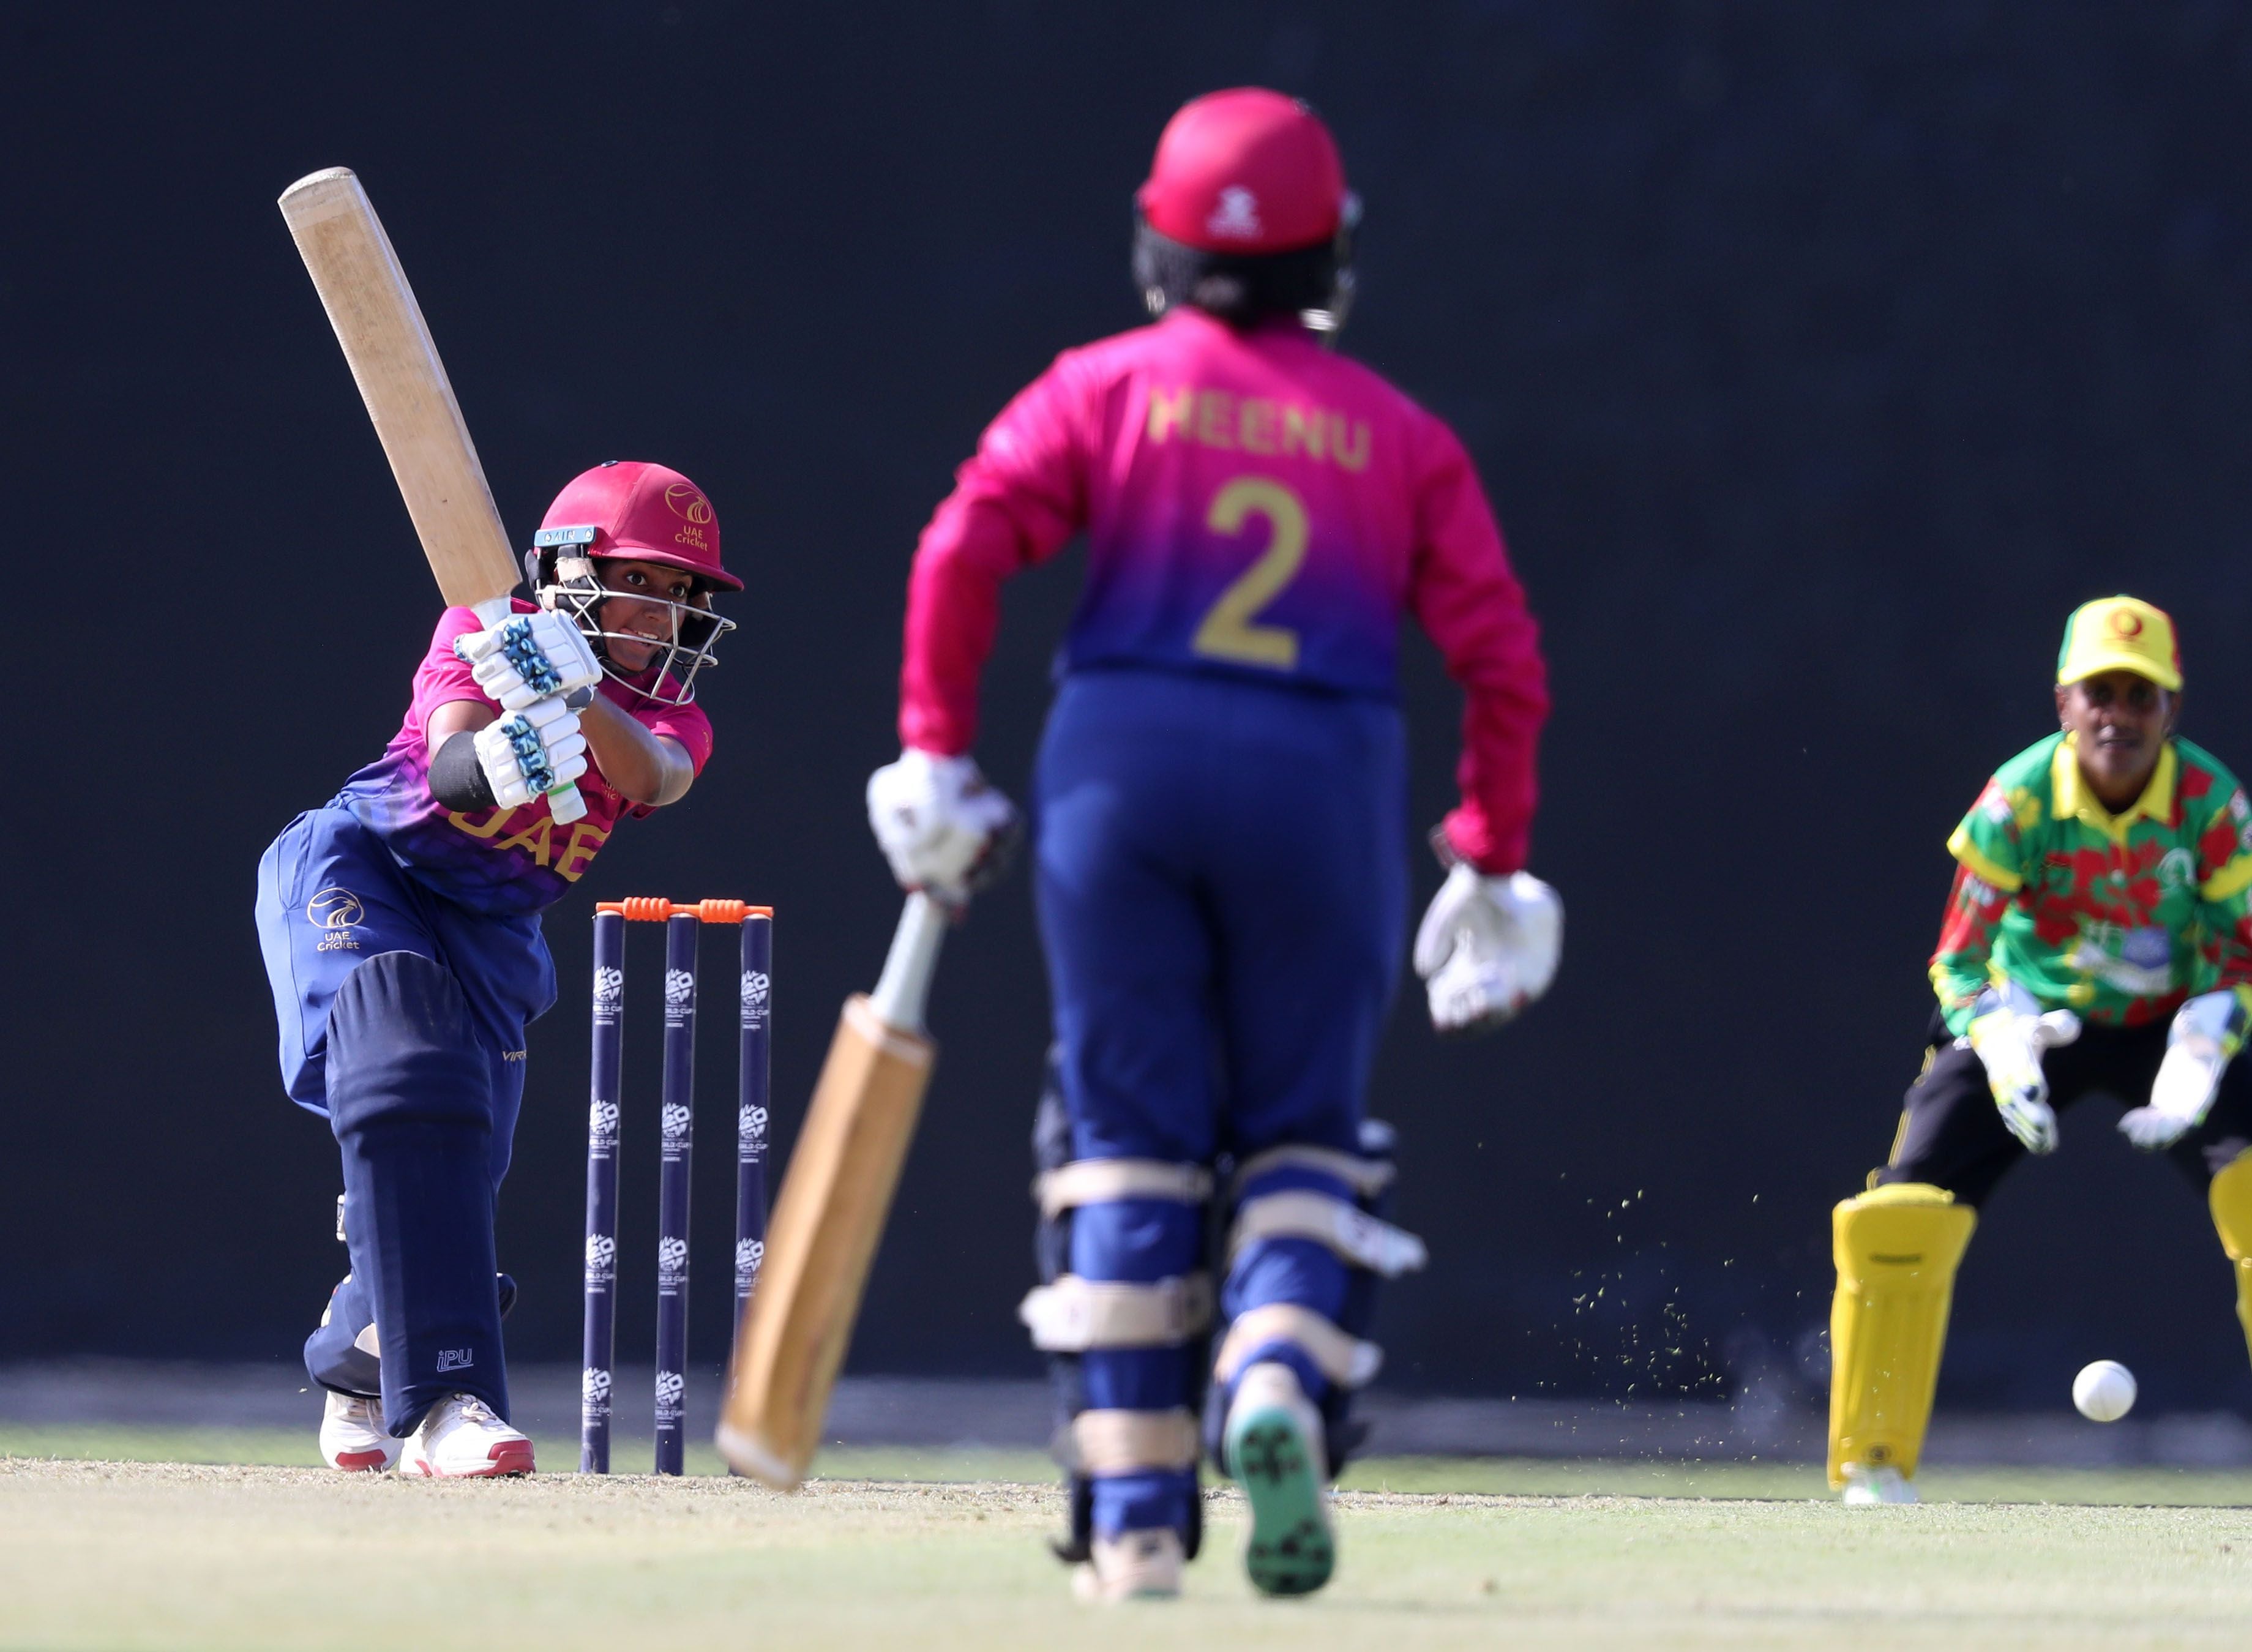 young stars of uae are at crossroads on path to top of women’s cricket